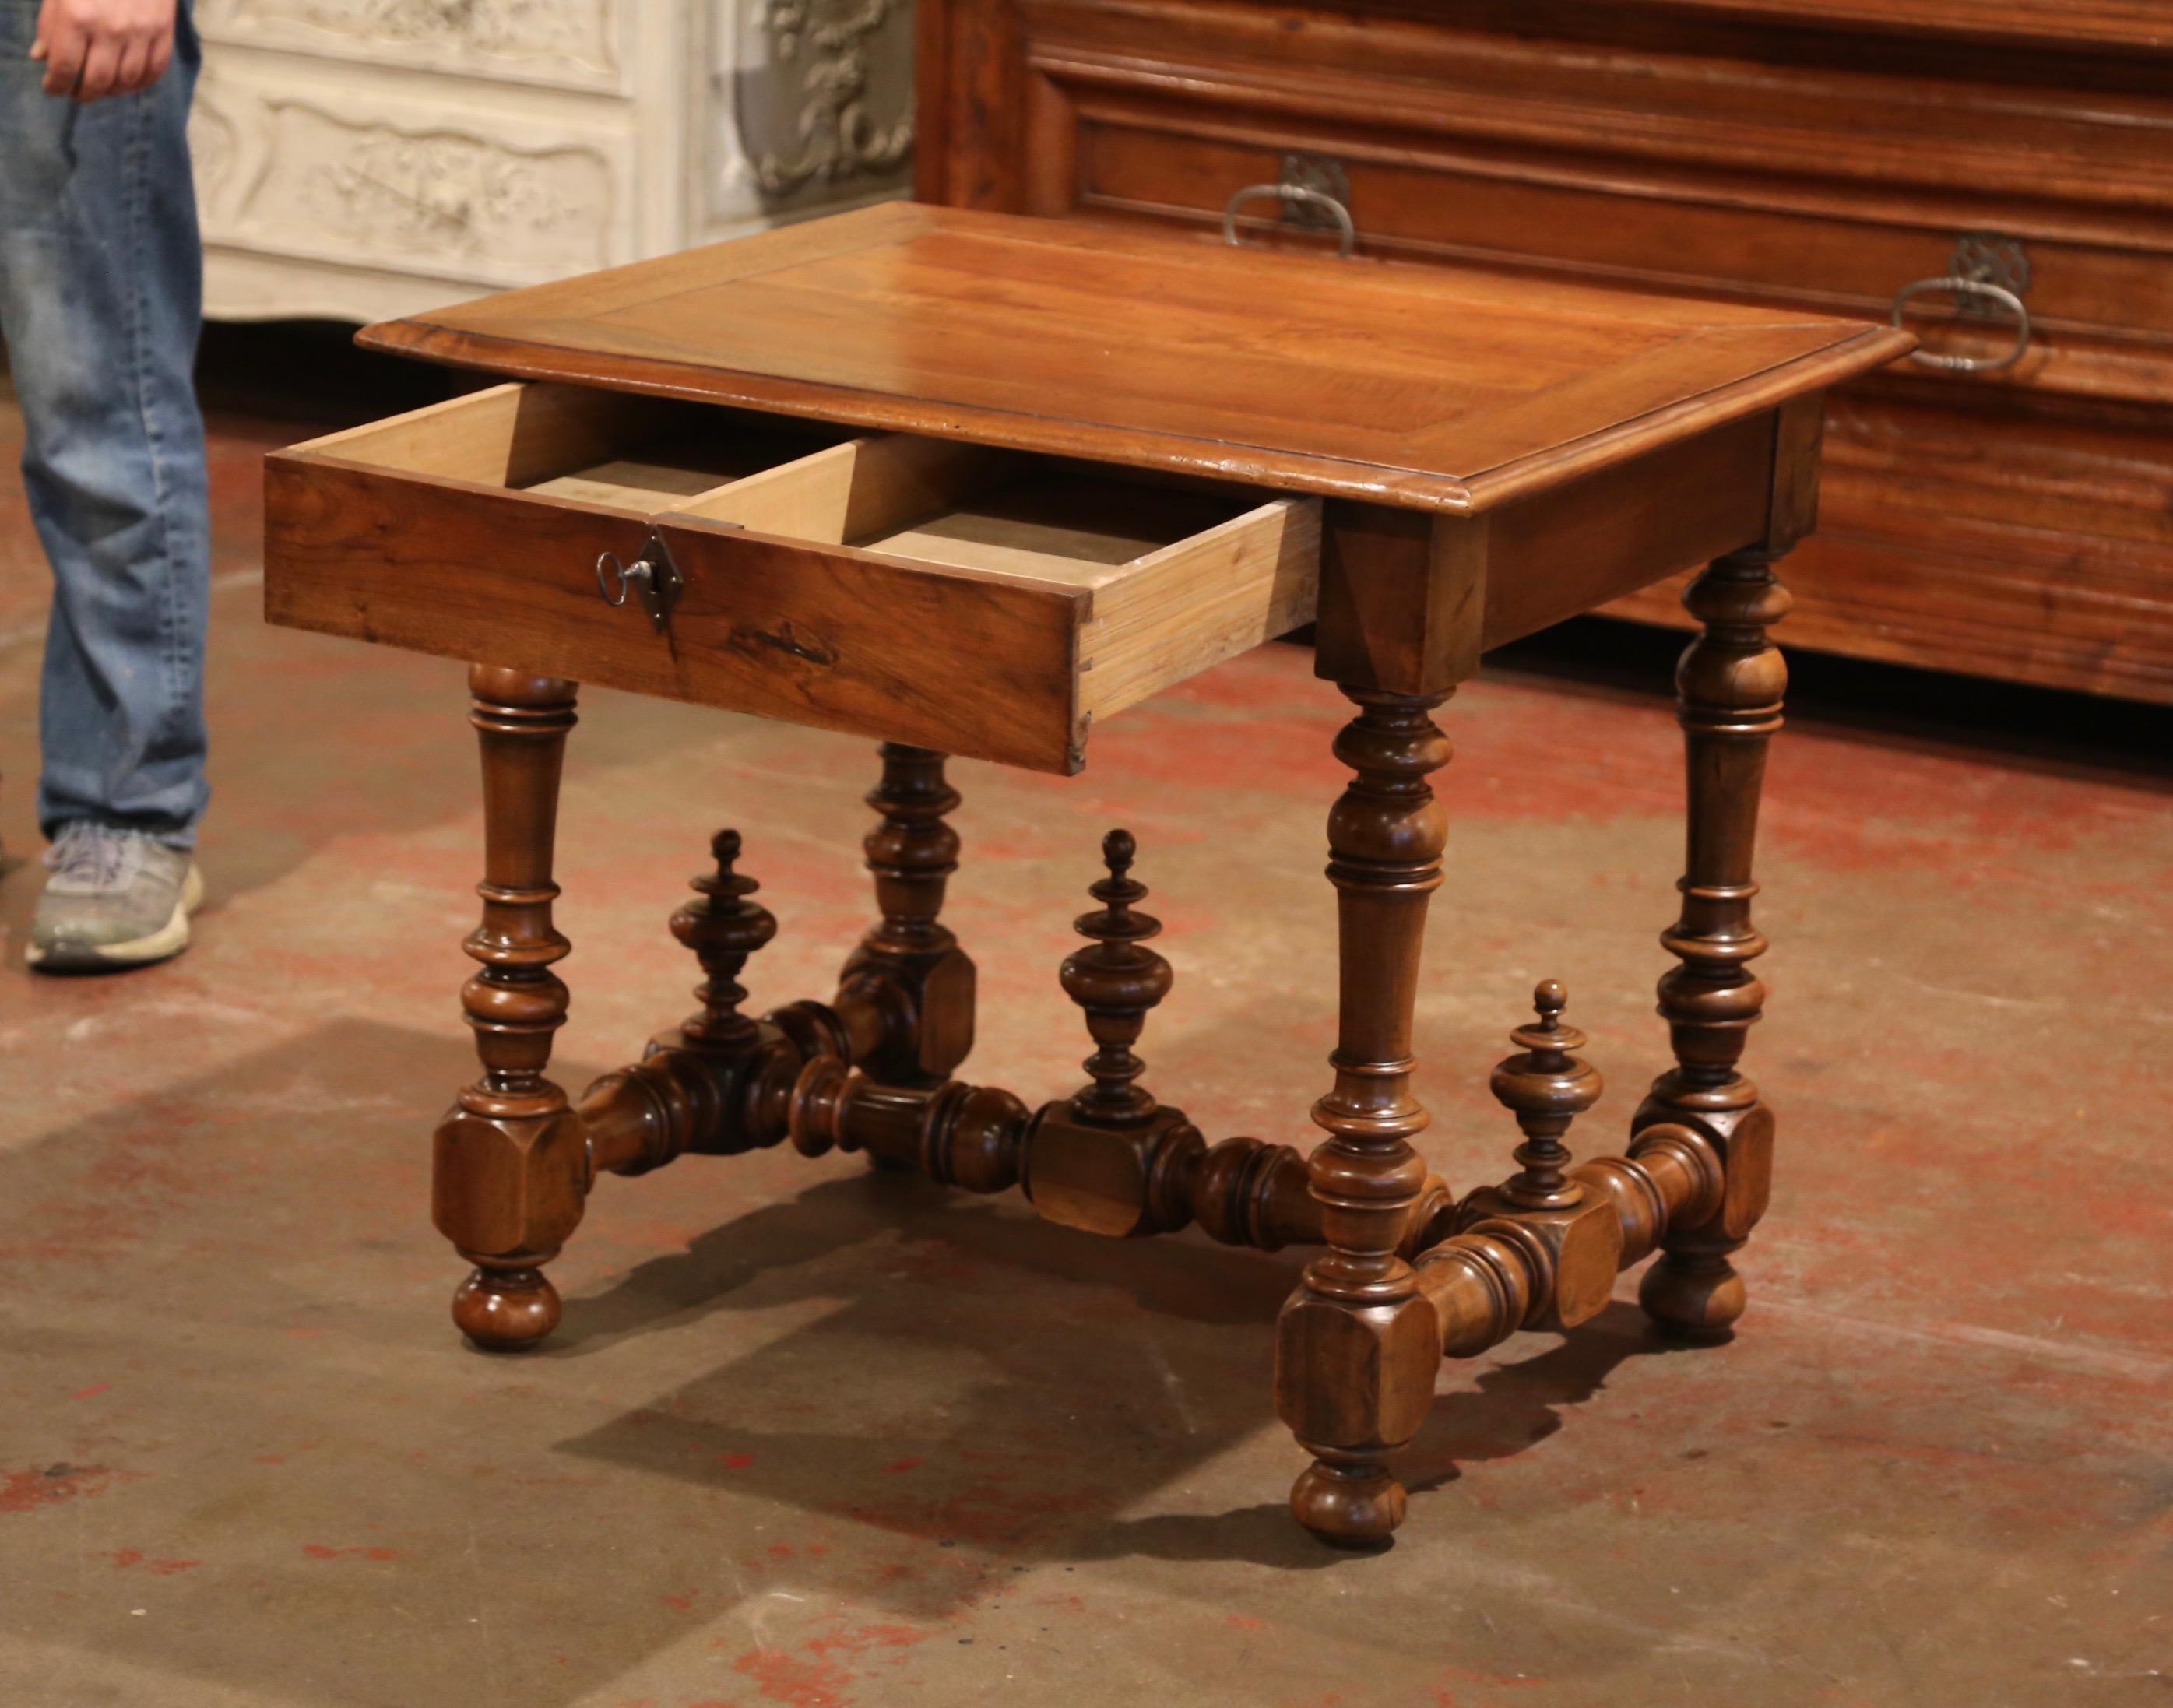 Pearwood 19th Century Louis XIII Carved Walnut and Pear Table with Decorative Finials